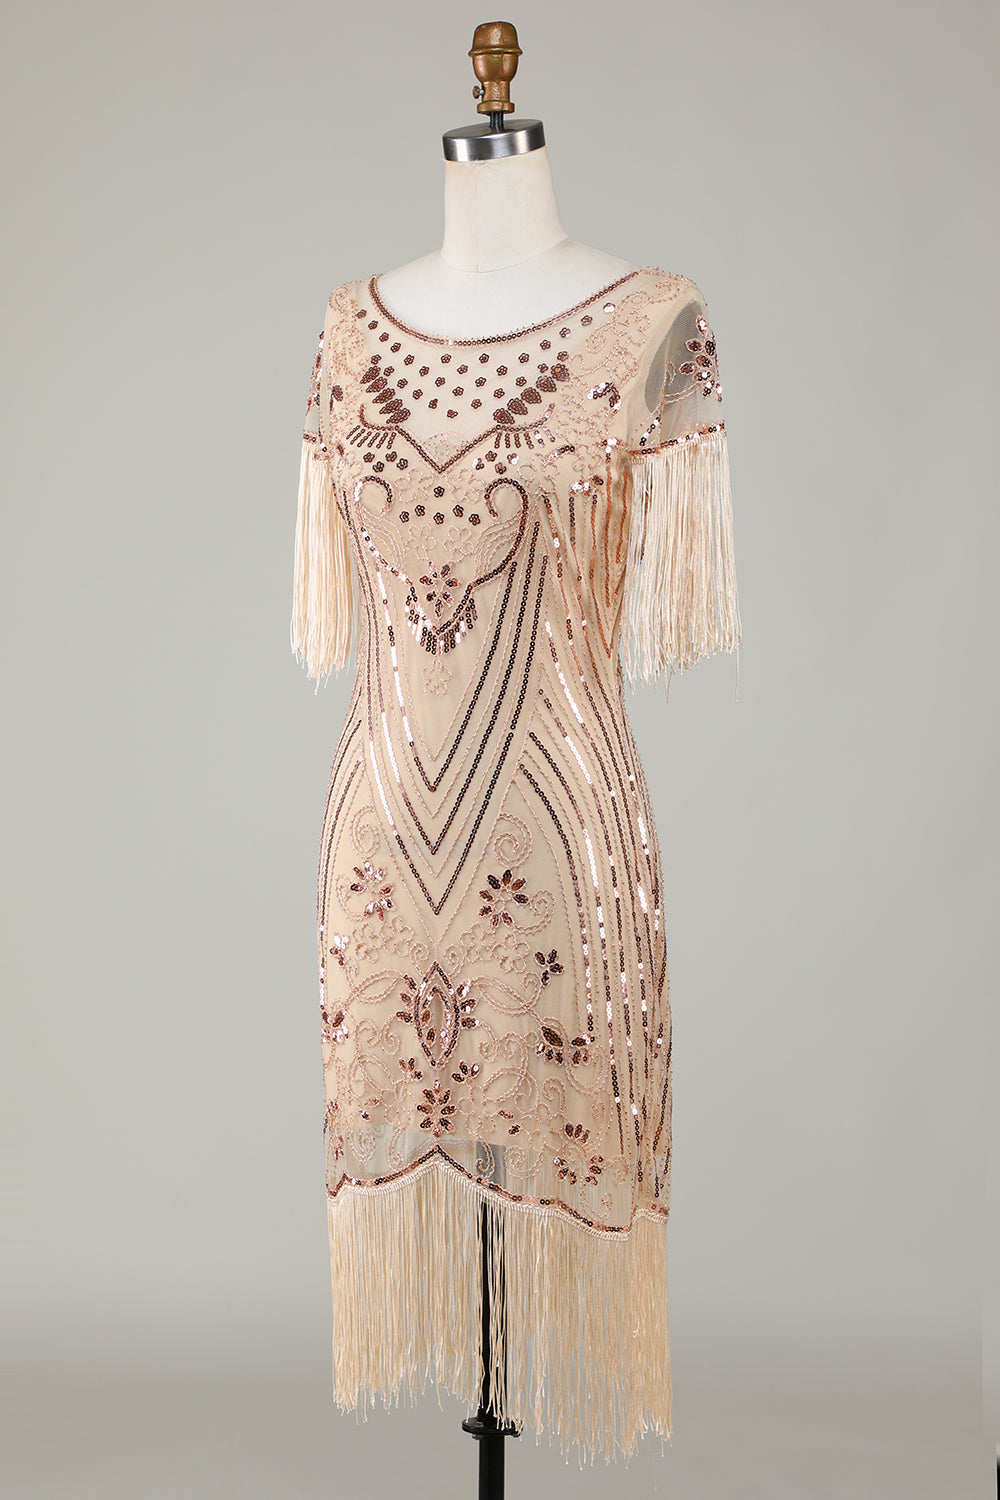 Boat Neck Sequins Champagne Roaring 20s Gatsby Fringed Flapper Dress